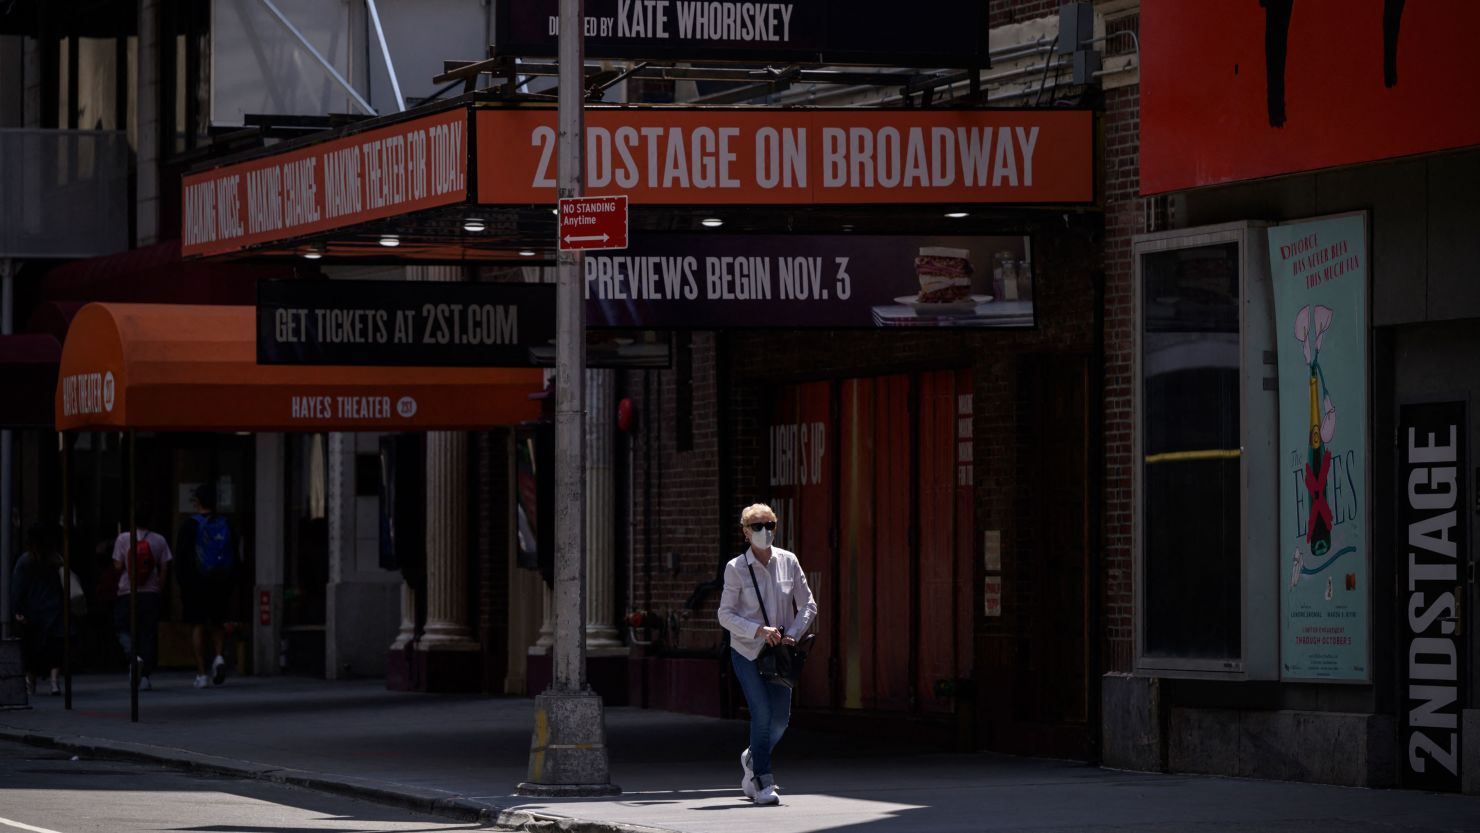 A pedestrian wearing a mask stands walks past a Broadway theatre in New York 
city on July 30. Several shows were canceled this week due to Covid-19 outbreaks.